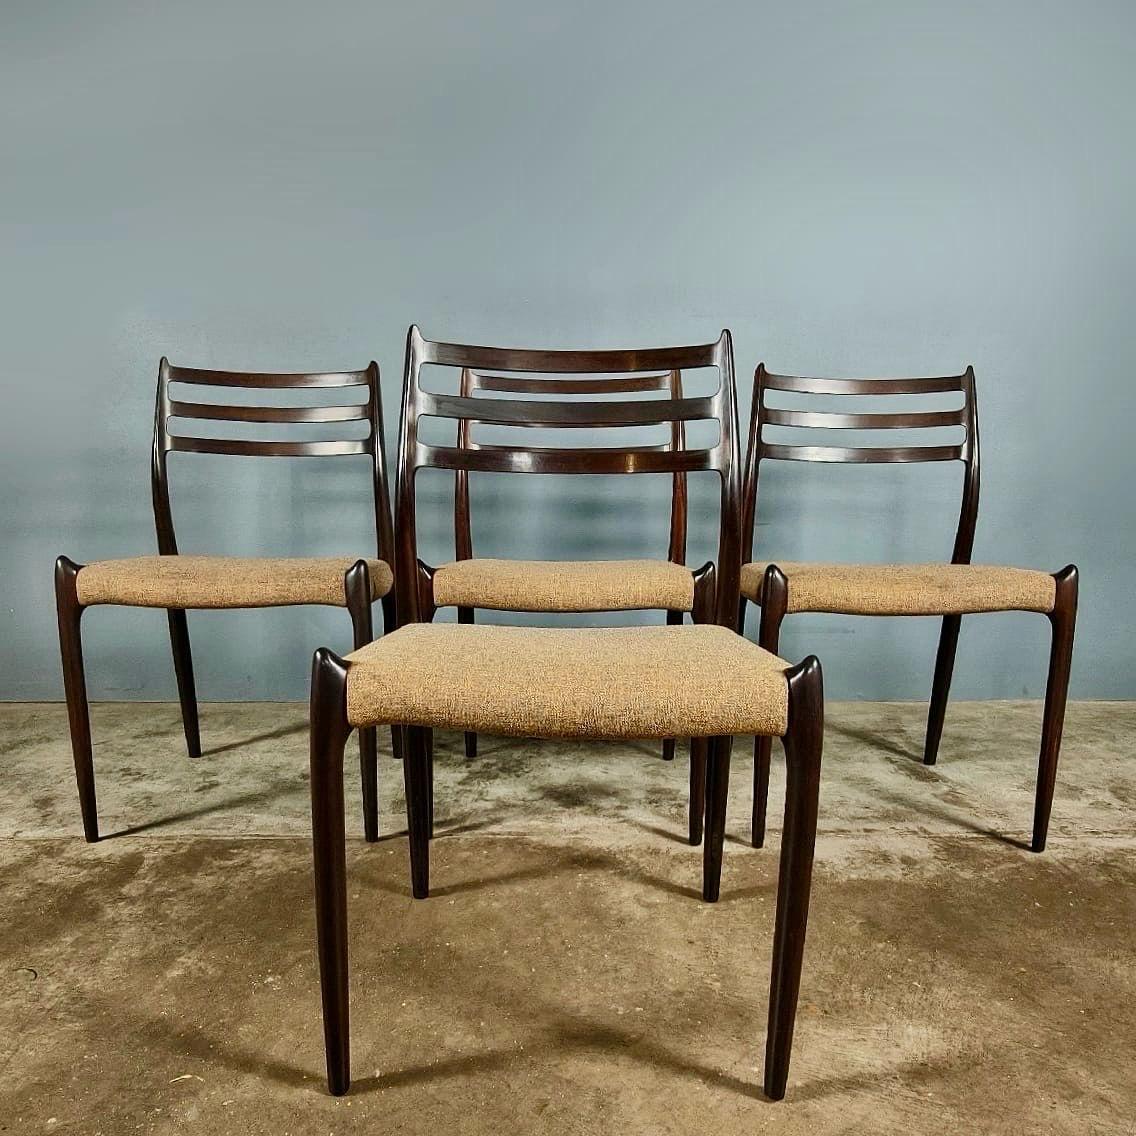 New Stock ✅

4 x Model 78 Rosewood Dining chairs by Niels Otto Moller for J.L. Mollers Mobelfabrik 

In 1944, Niels Otto Møller founded J.L. Møllers Møbelfabrik in Denmark. J. L. Møllers Møbelfabrik produces chairs of extremely high quality, in